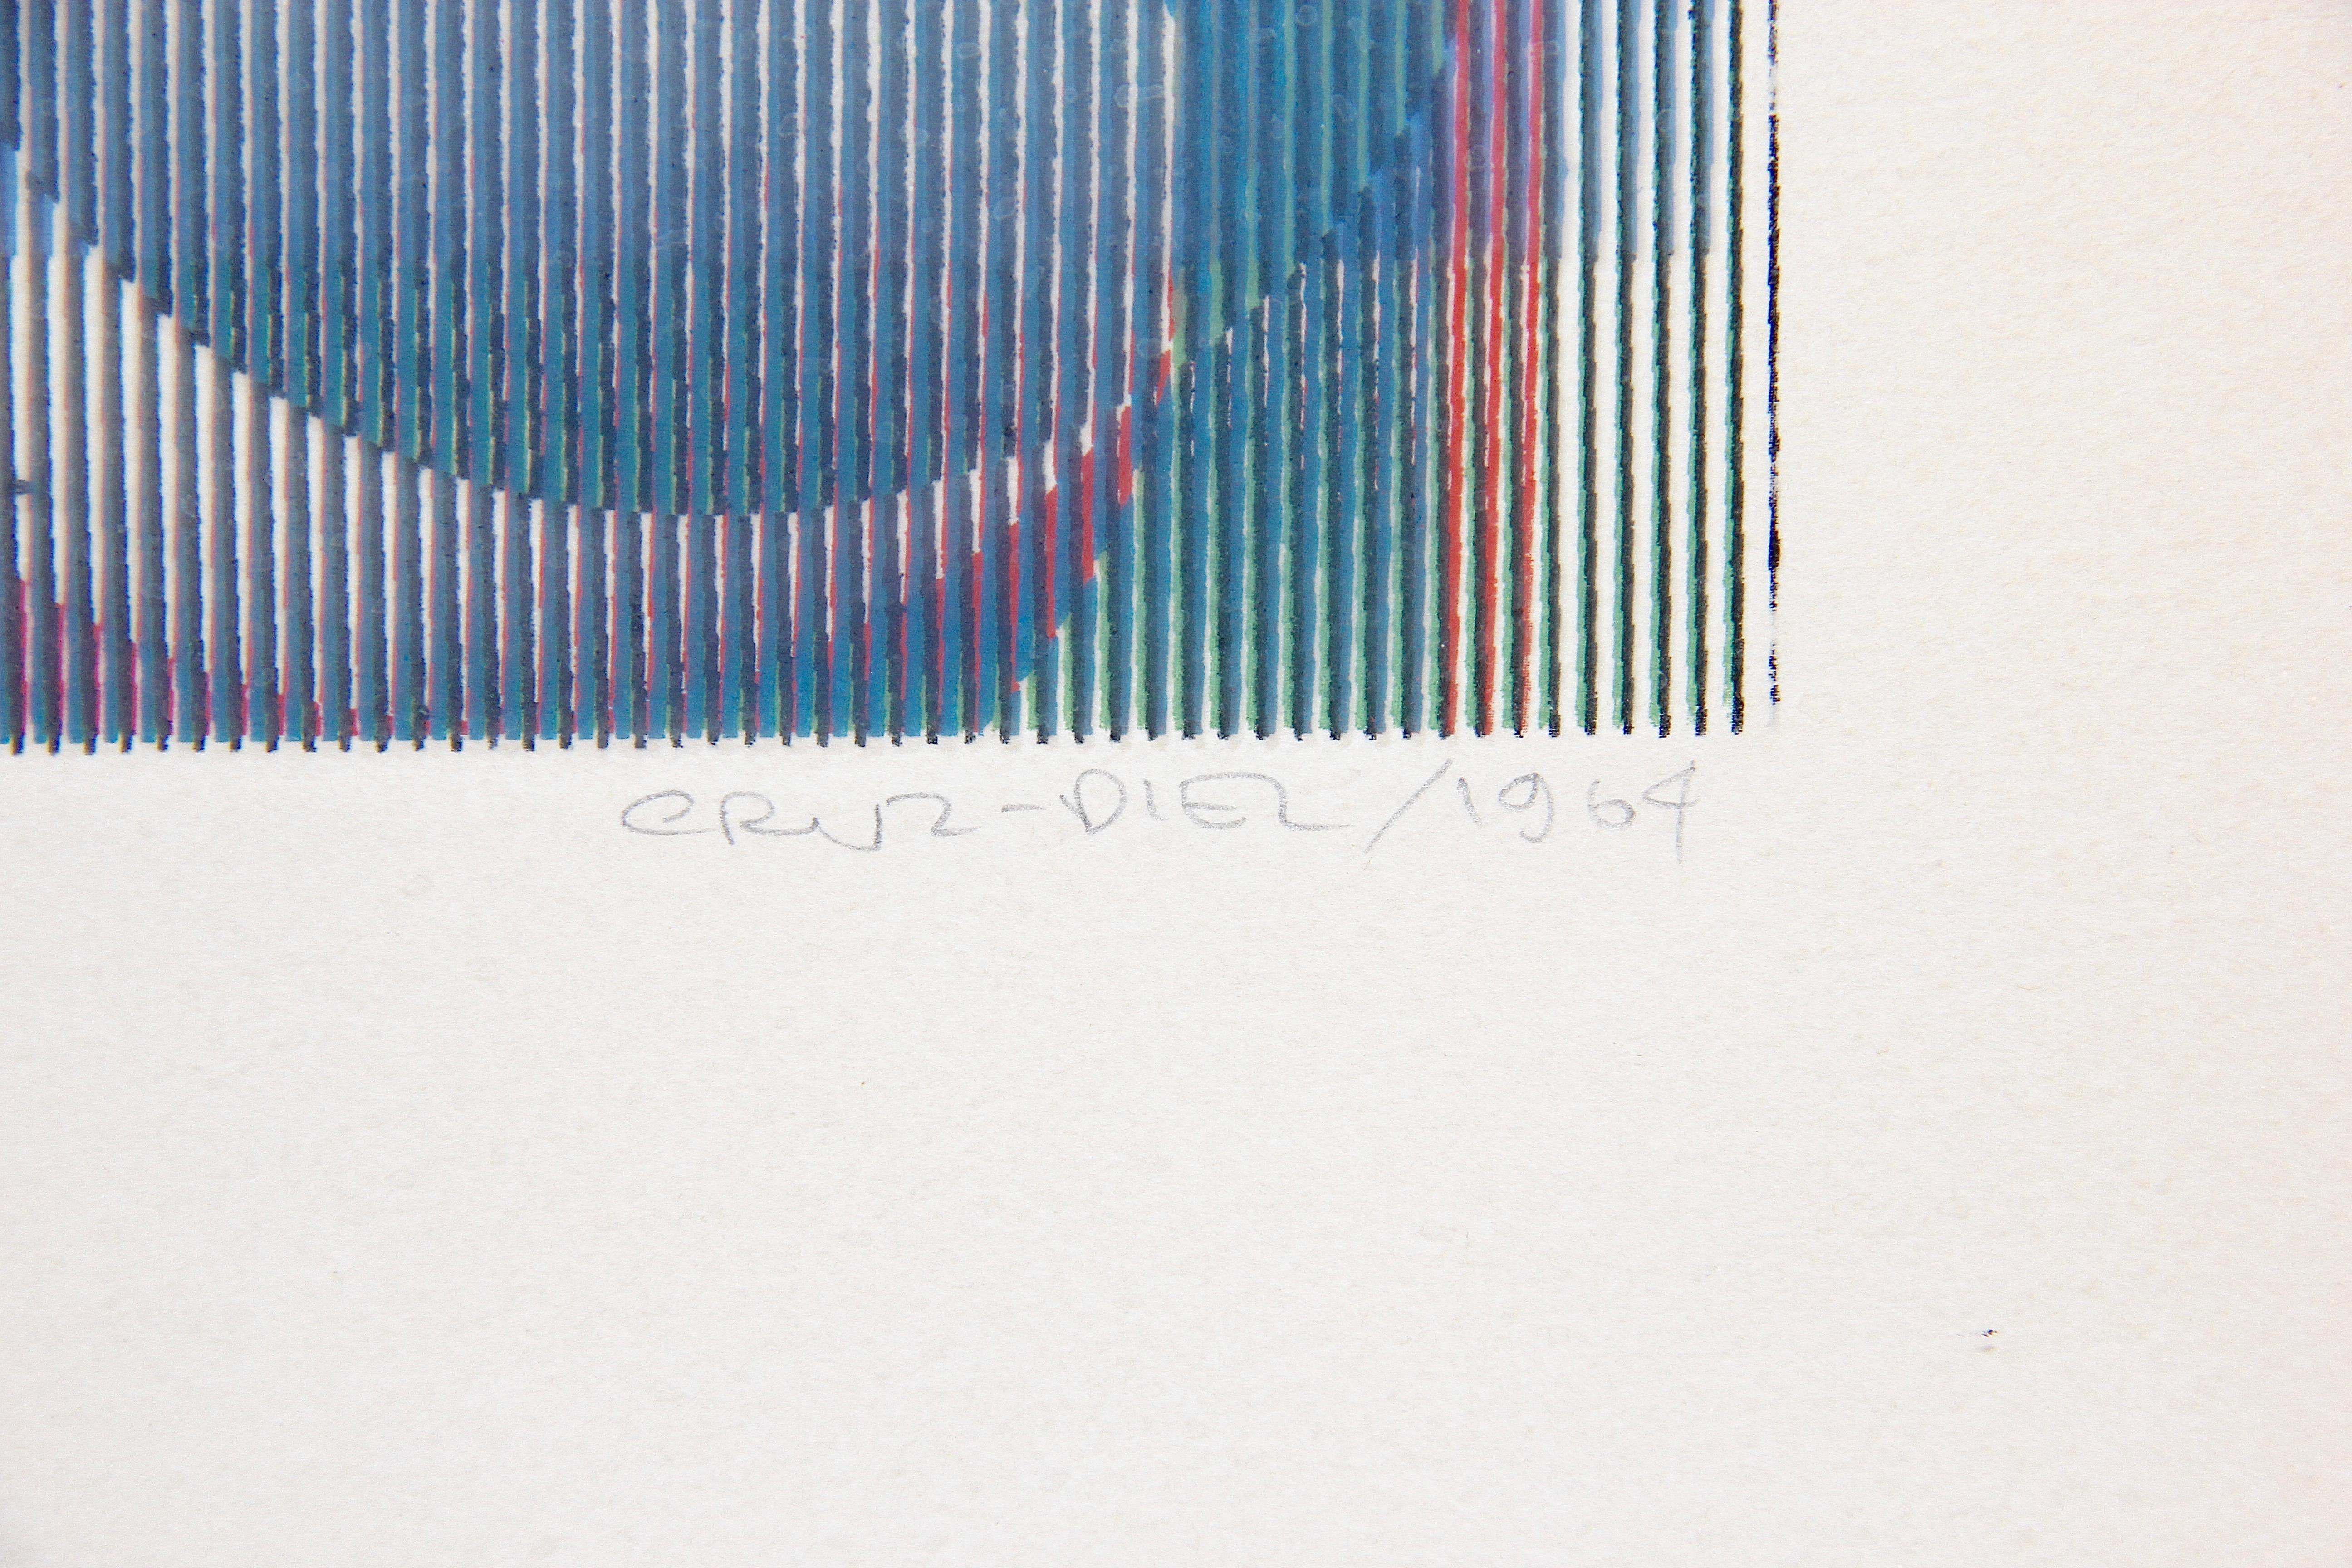 Untitled, 1964, Signed, dated and numbered - Modern Painting by Carlos Cruz-Diez